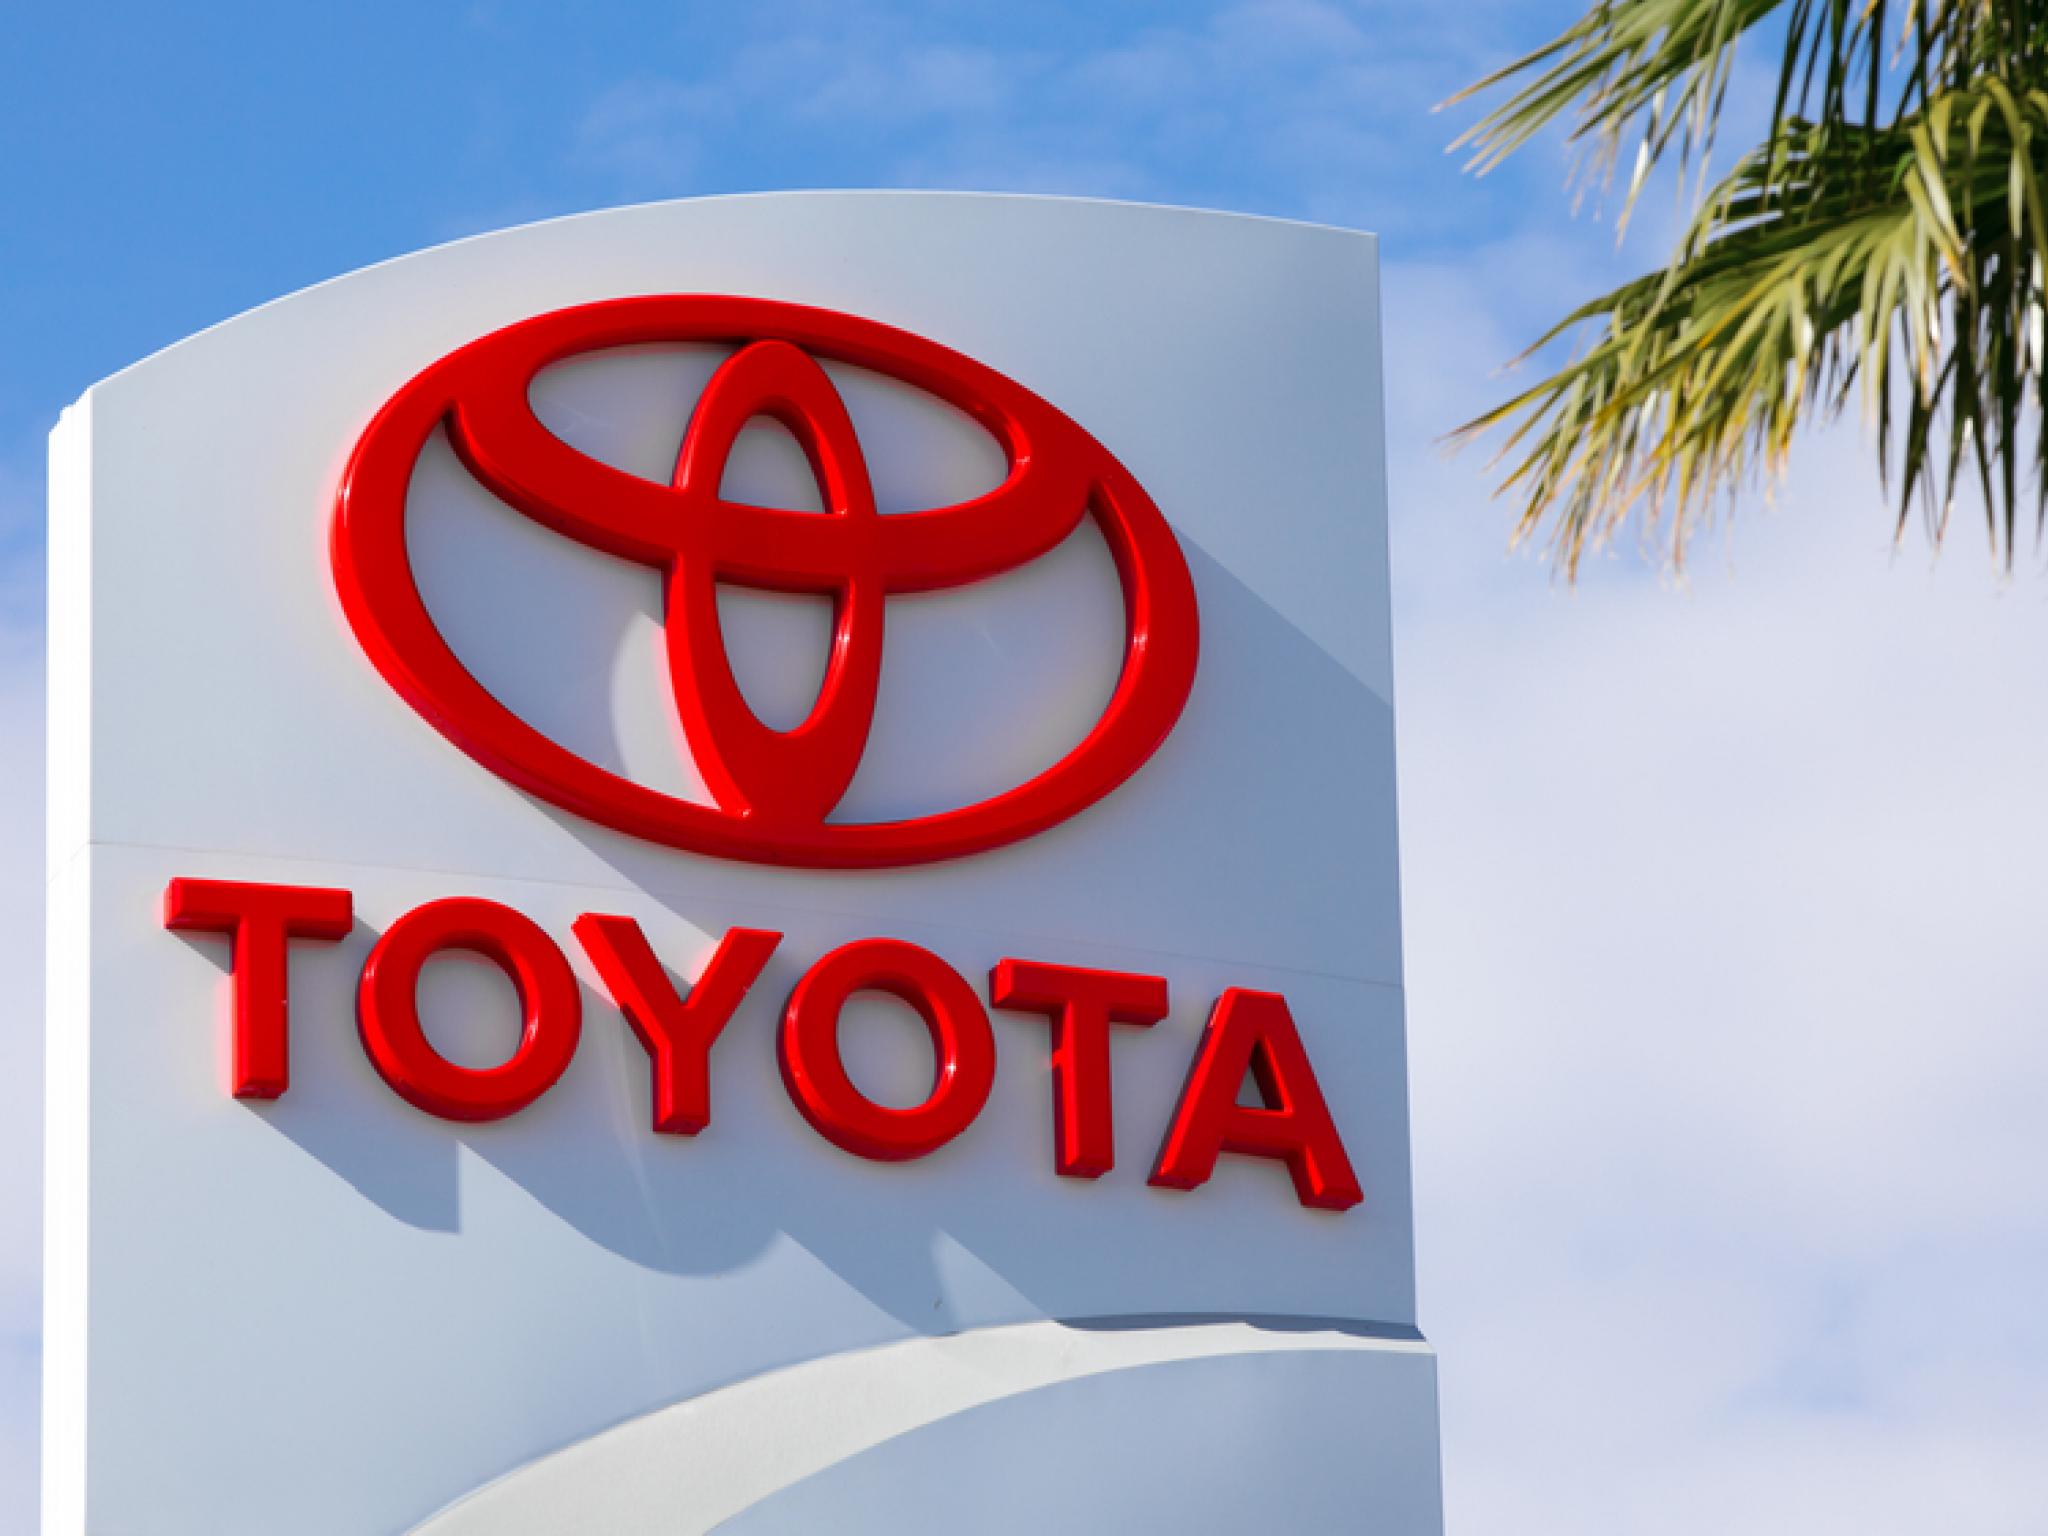  whats-going-on-with-toyota-shares-after-recalling-211000-prius-cars-owing-to-door-handle-issues 